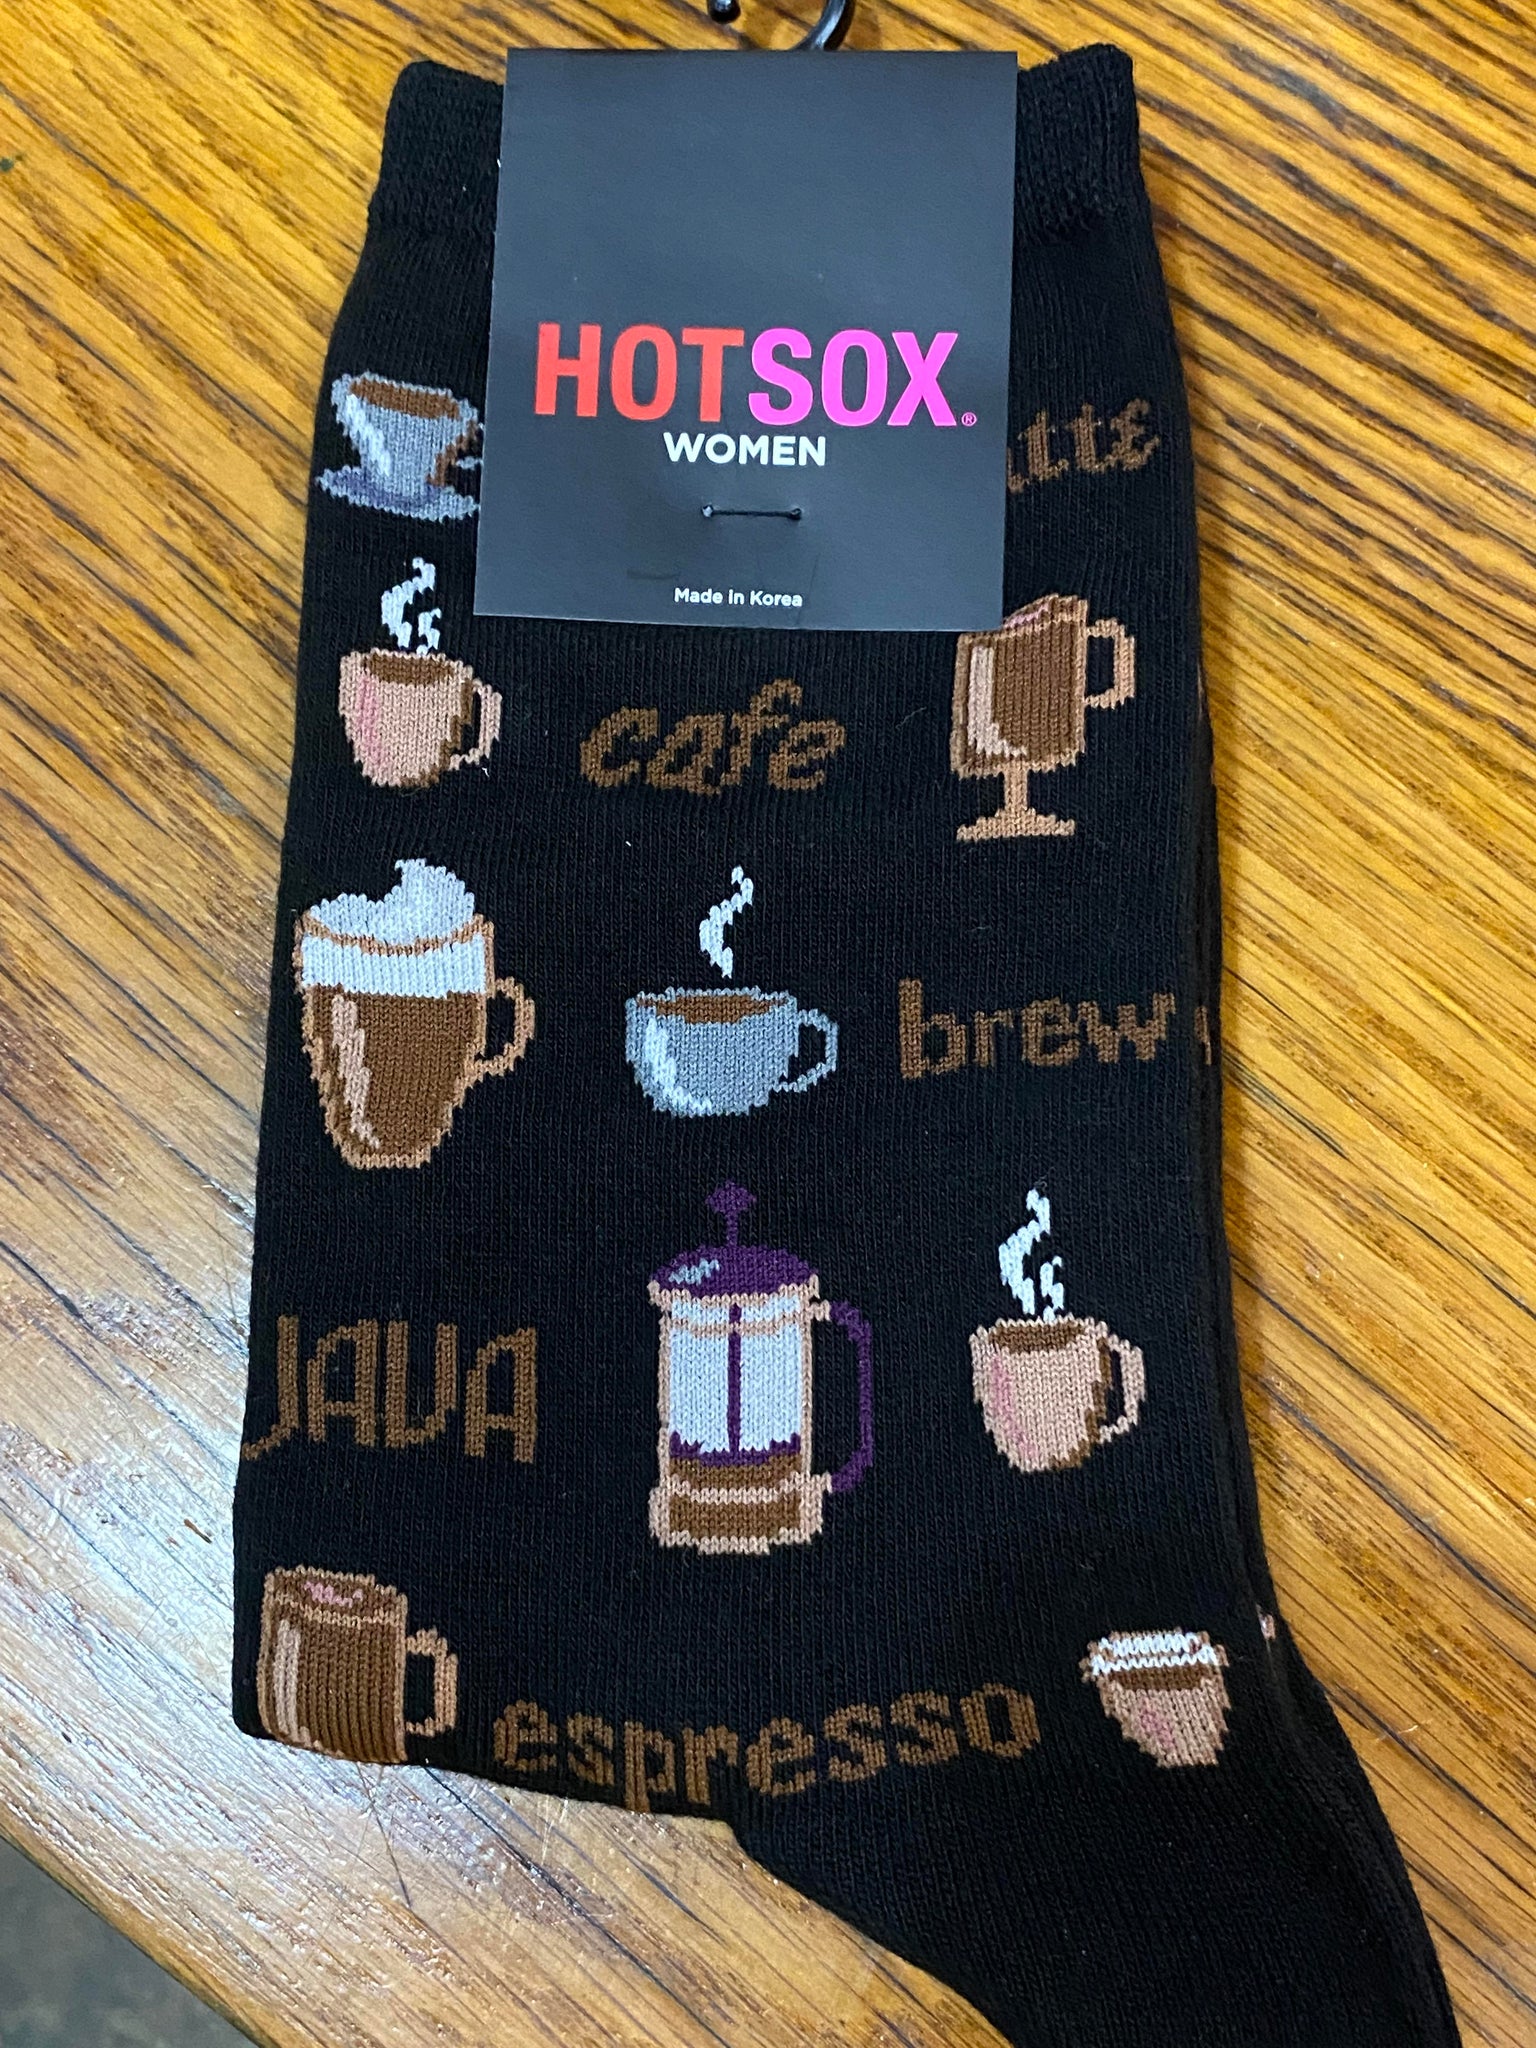 Hot Sox Women - Cafe Style